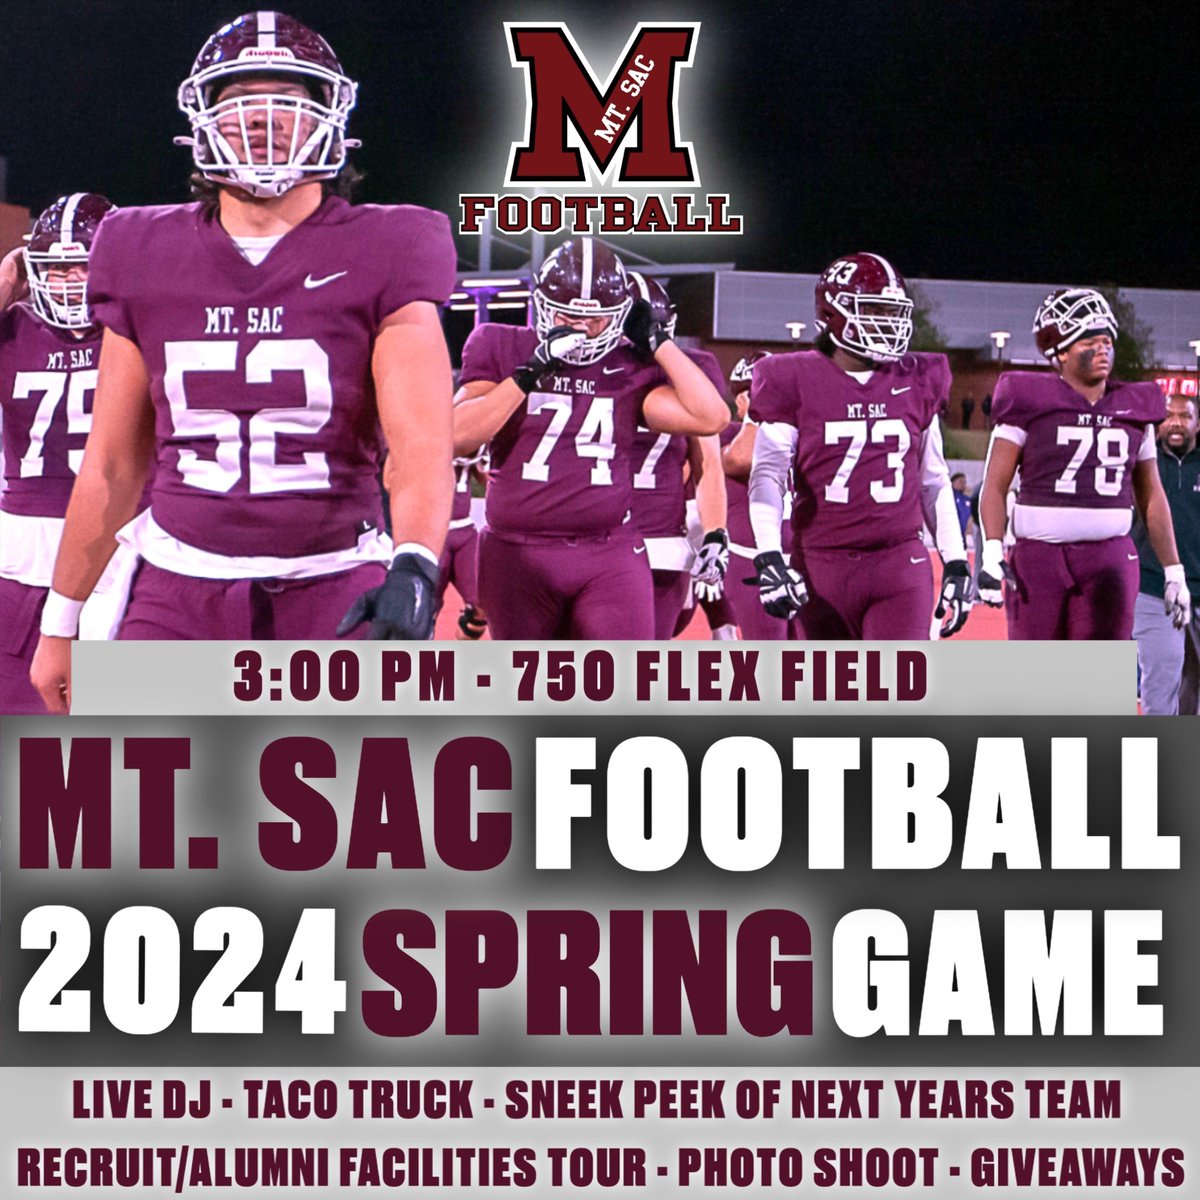 Don't miss out on the Mt. SAC Football 2024 Spring Game May 30th @ 3pm. Enjoy Tacos, a live DJ, a Photobooth, and giveaways as you get a sneek peek of the 2024 Football Team. Don't miss out! #SACDAWGS4LIFE #BORN2WIN #WhereTheBestAthletesCompete #MtSACFootball2024SpringGame